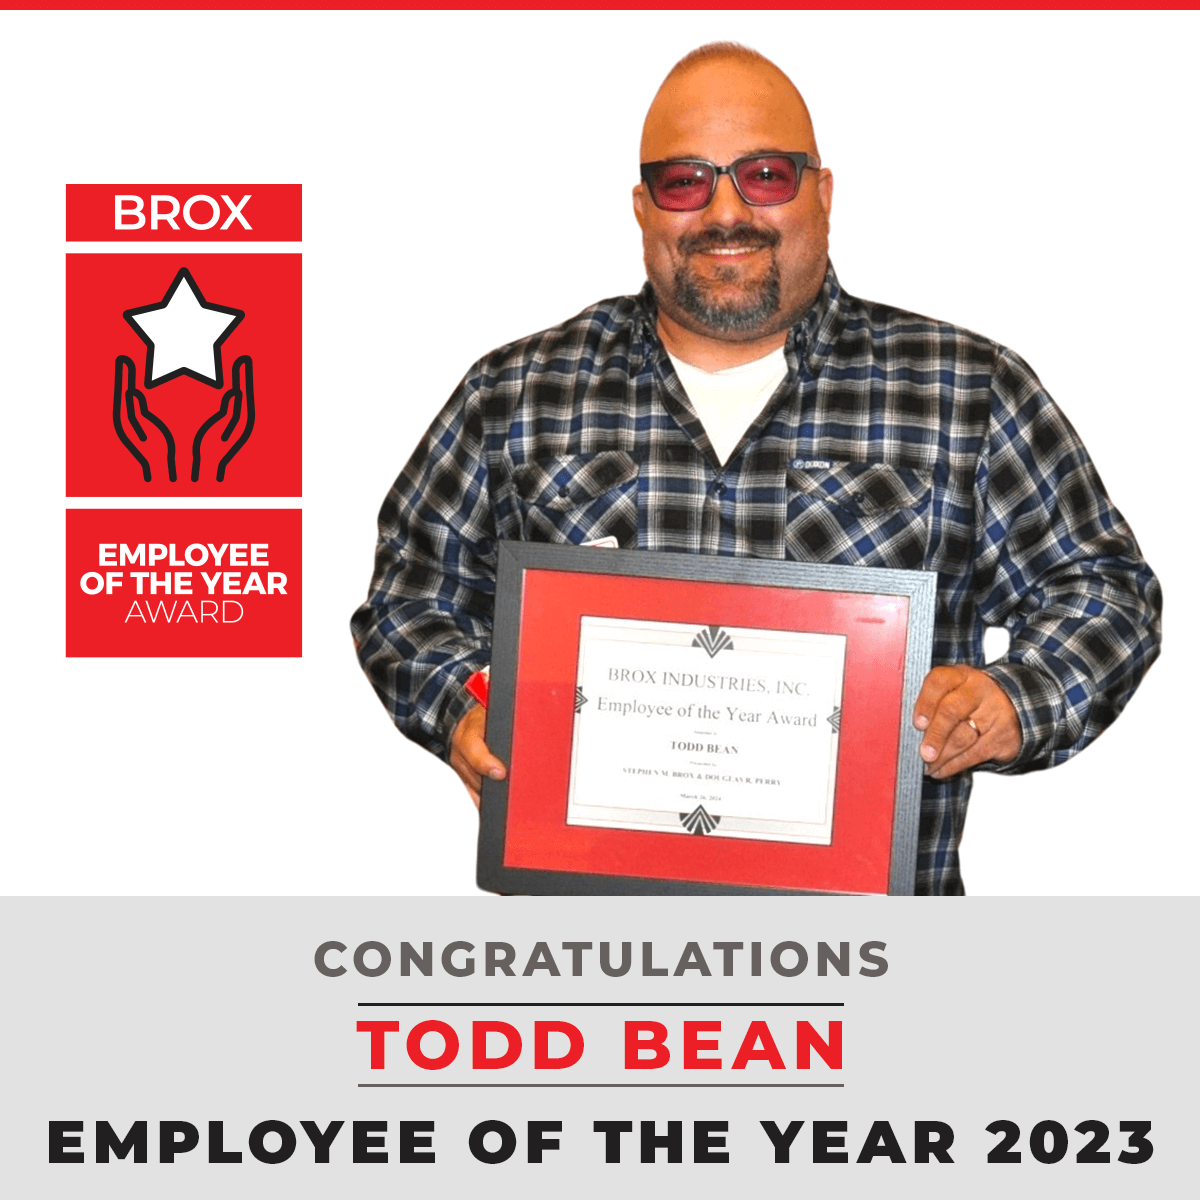 Drumroll, please! It's time to celebrate Todd Bean, our #EmployeeOfTheYear! Todd’s unwavering commitment & “Brox First” attitude sets him as a shining example of excellence. His willingness to lend a helping hand & exceptional work ethic makes him an invaluable asset to our team.